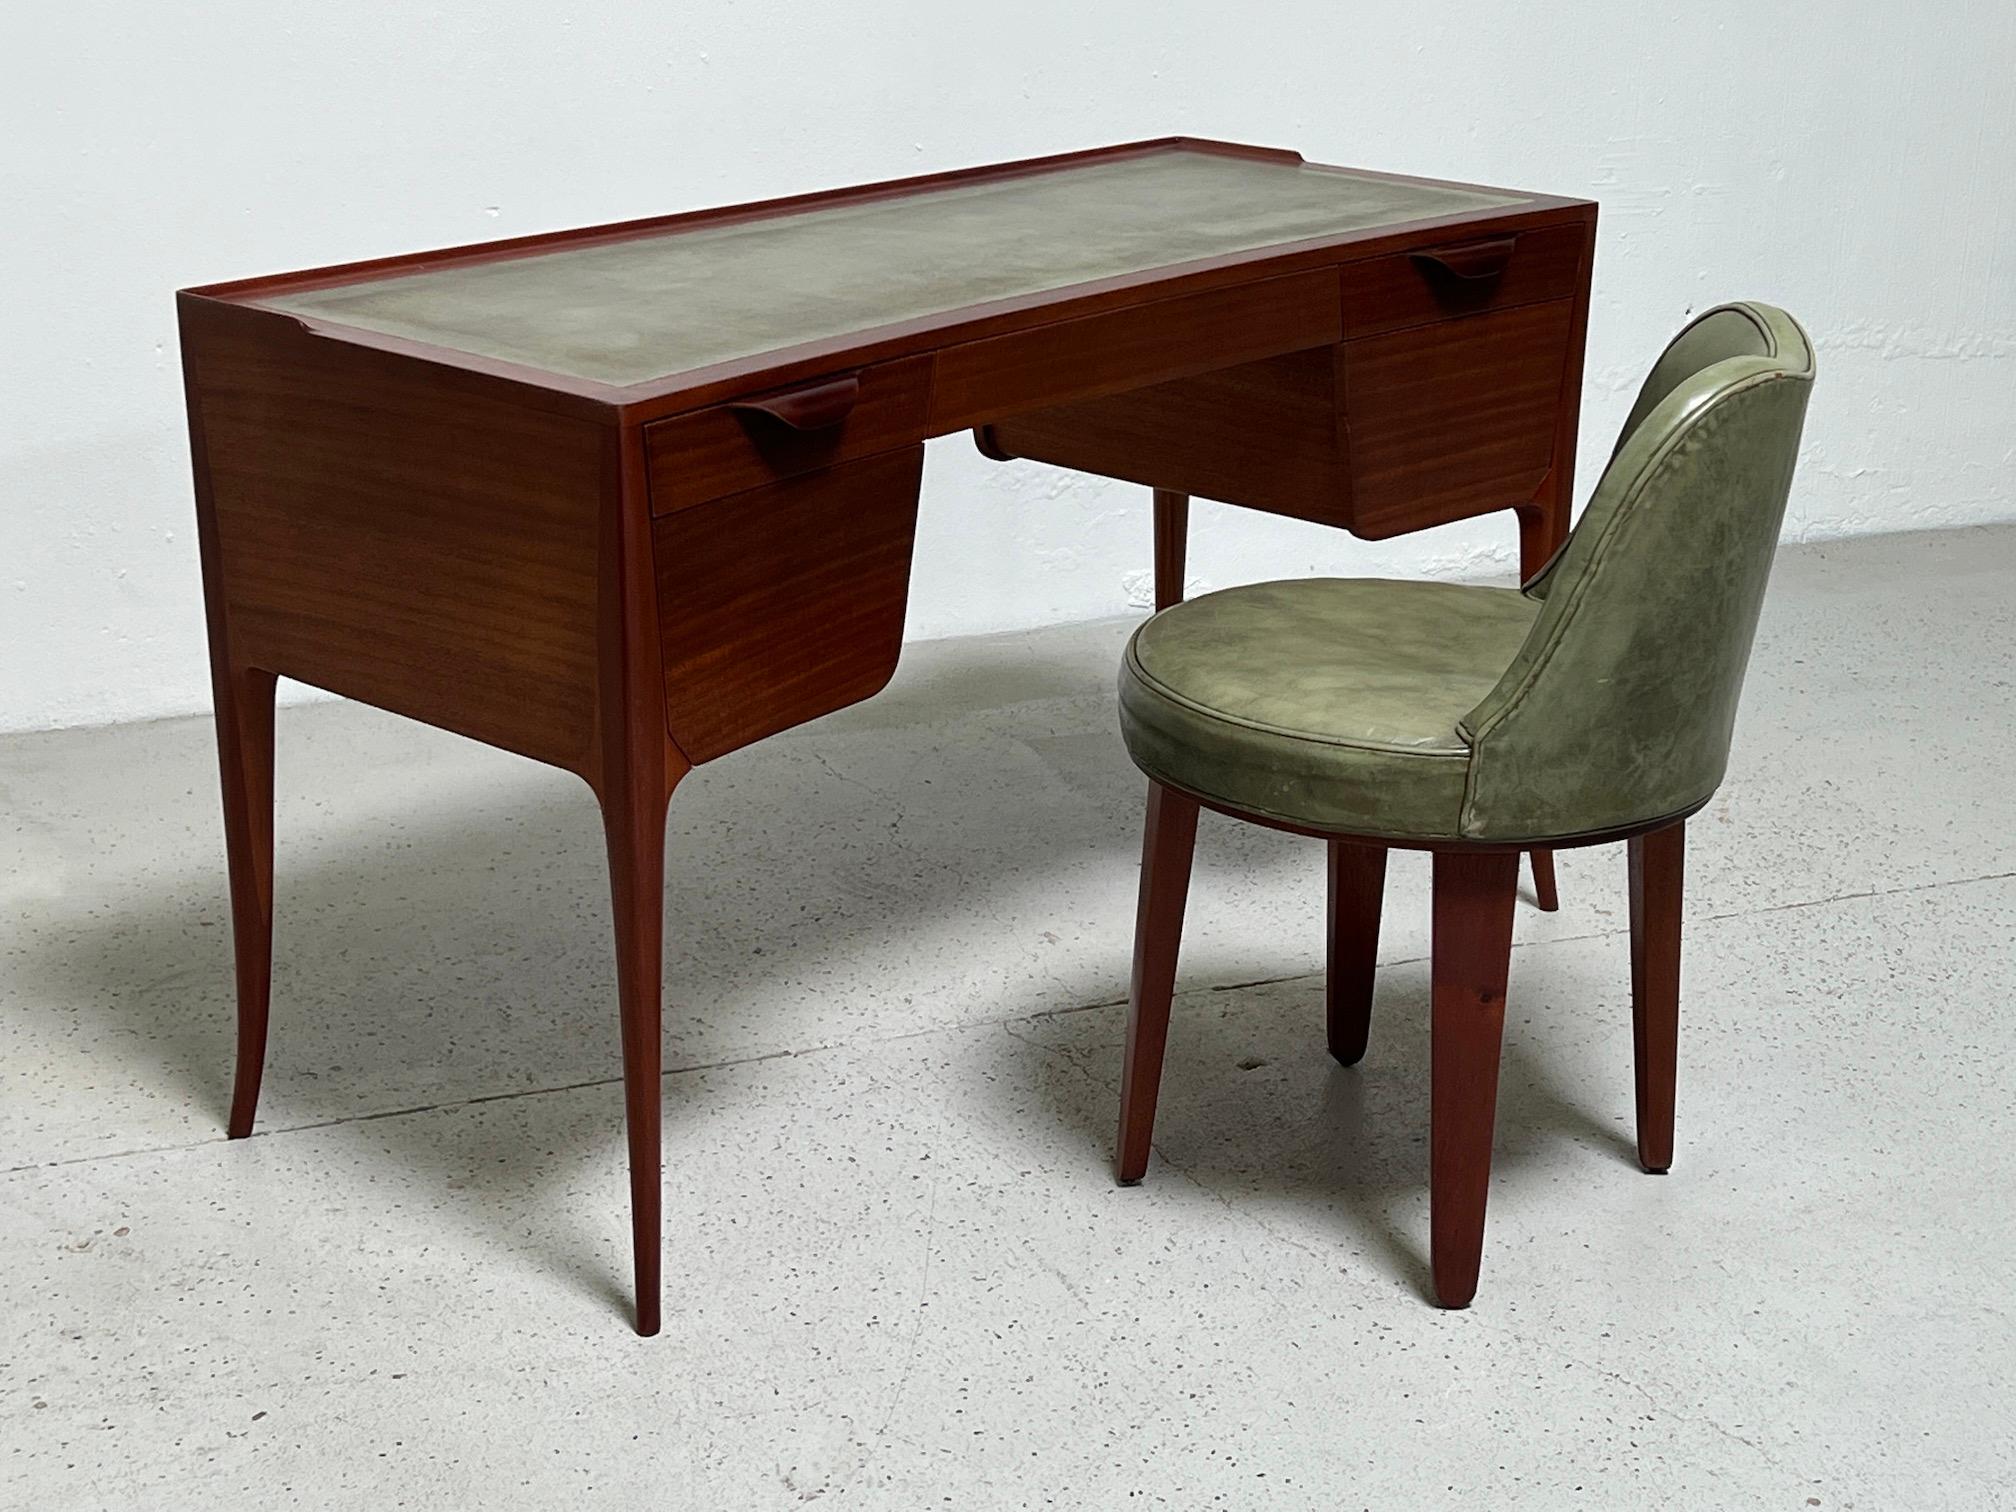 Mid-20th Century Edward Wormley for Dunbar Desk and Chair in Matching Leather